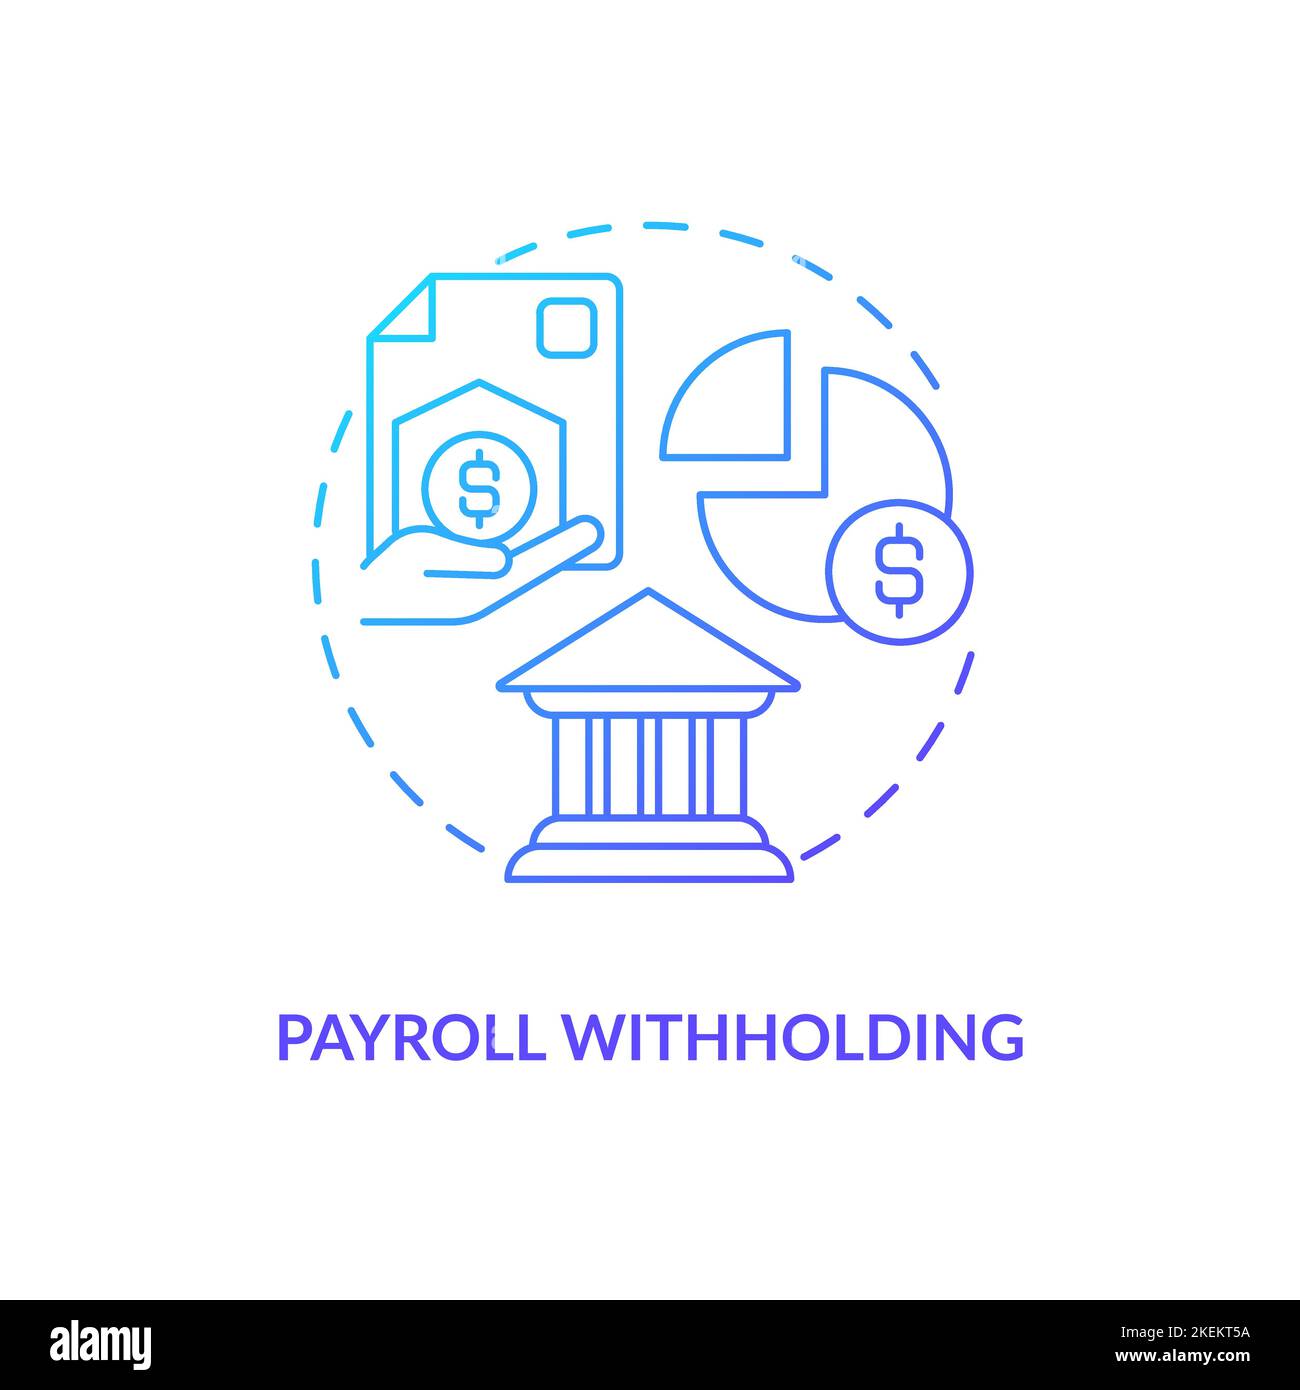 Payroll withholding blue gradient concept icon Stock Vector